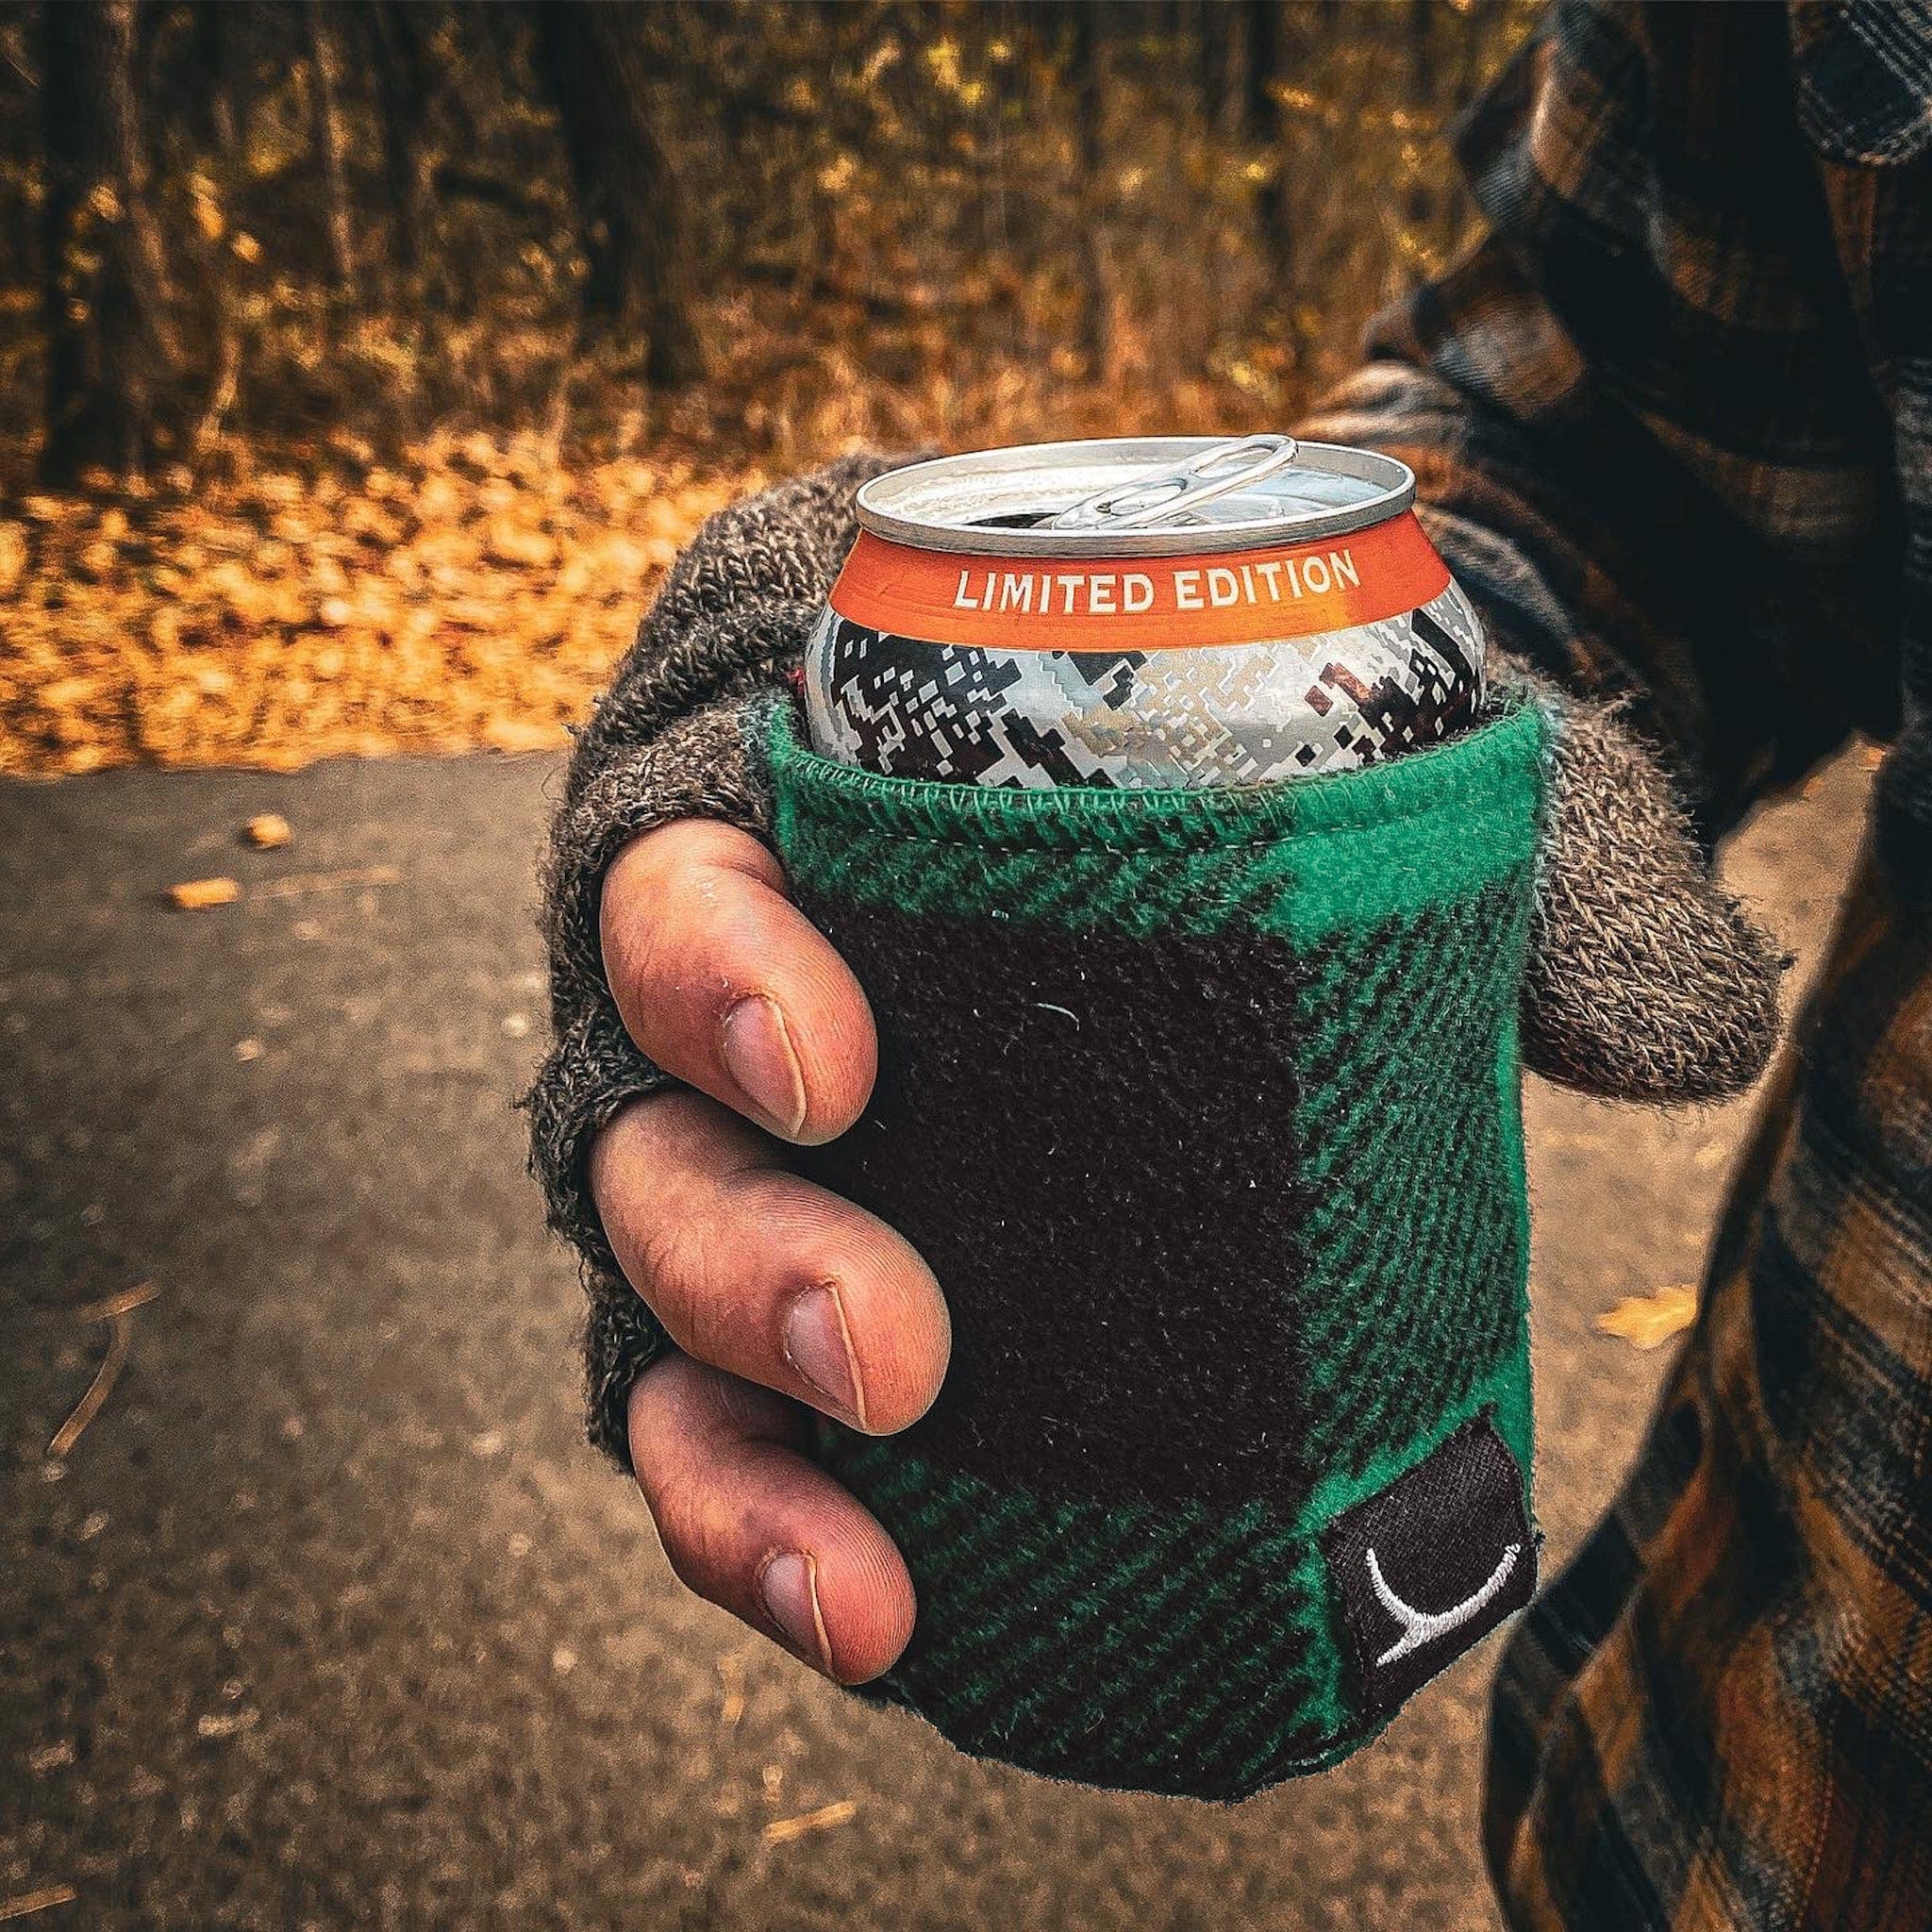 Insulated Can Holder-Wi Fi! - Cooler Soda Beer Koozie Coozie